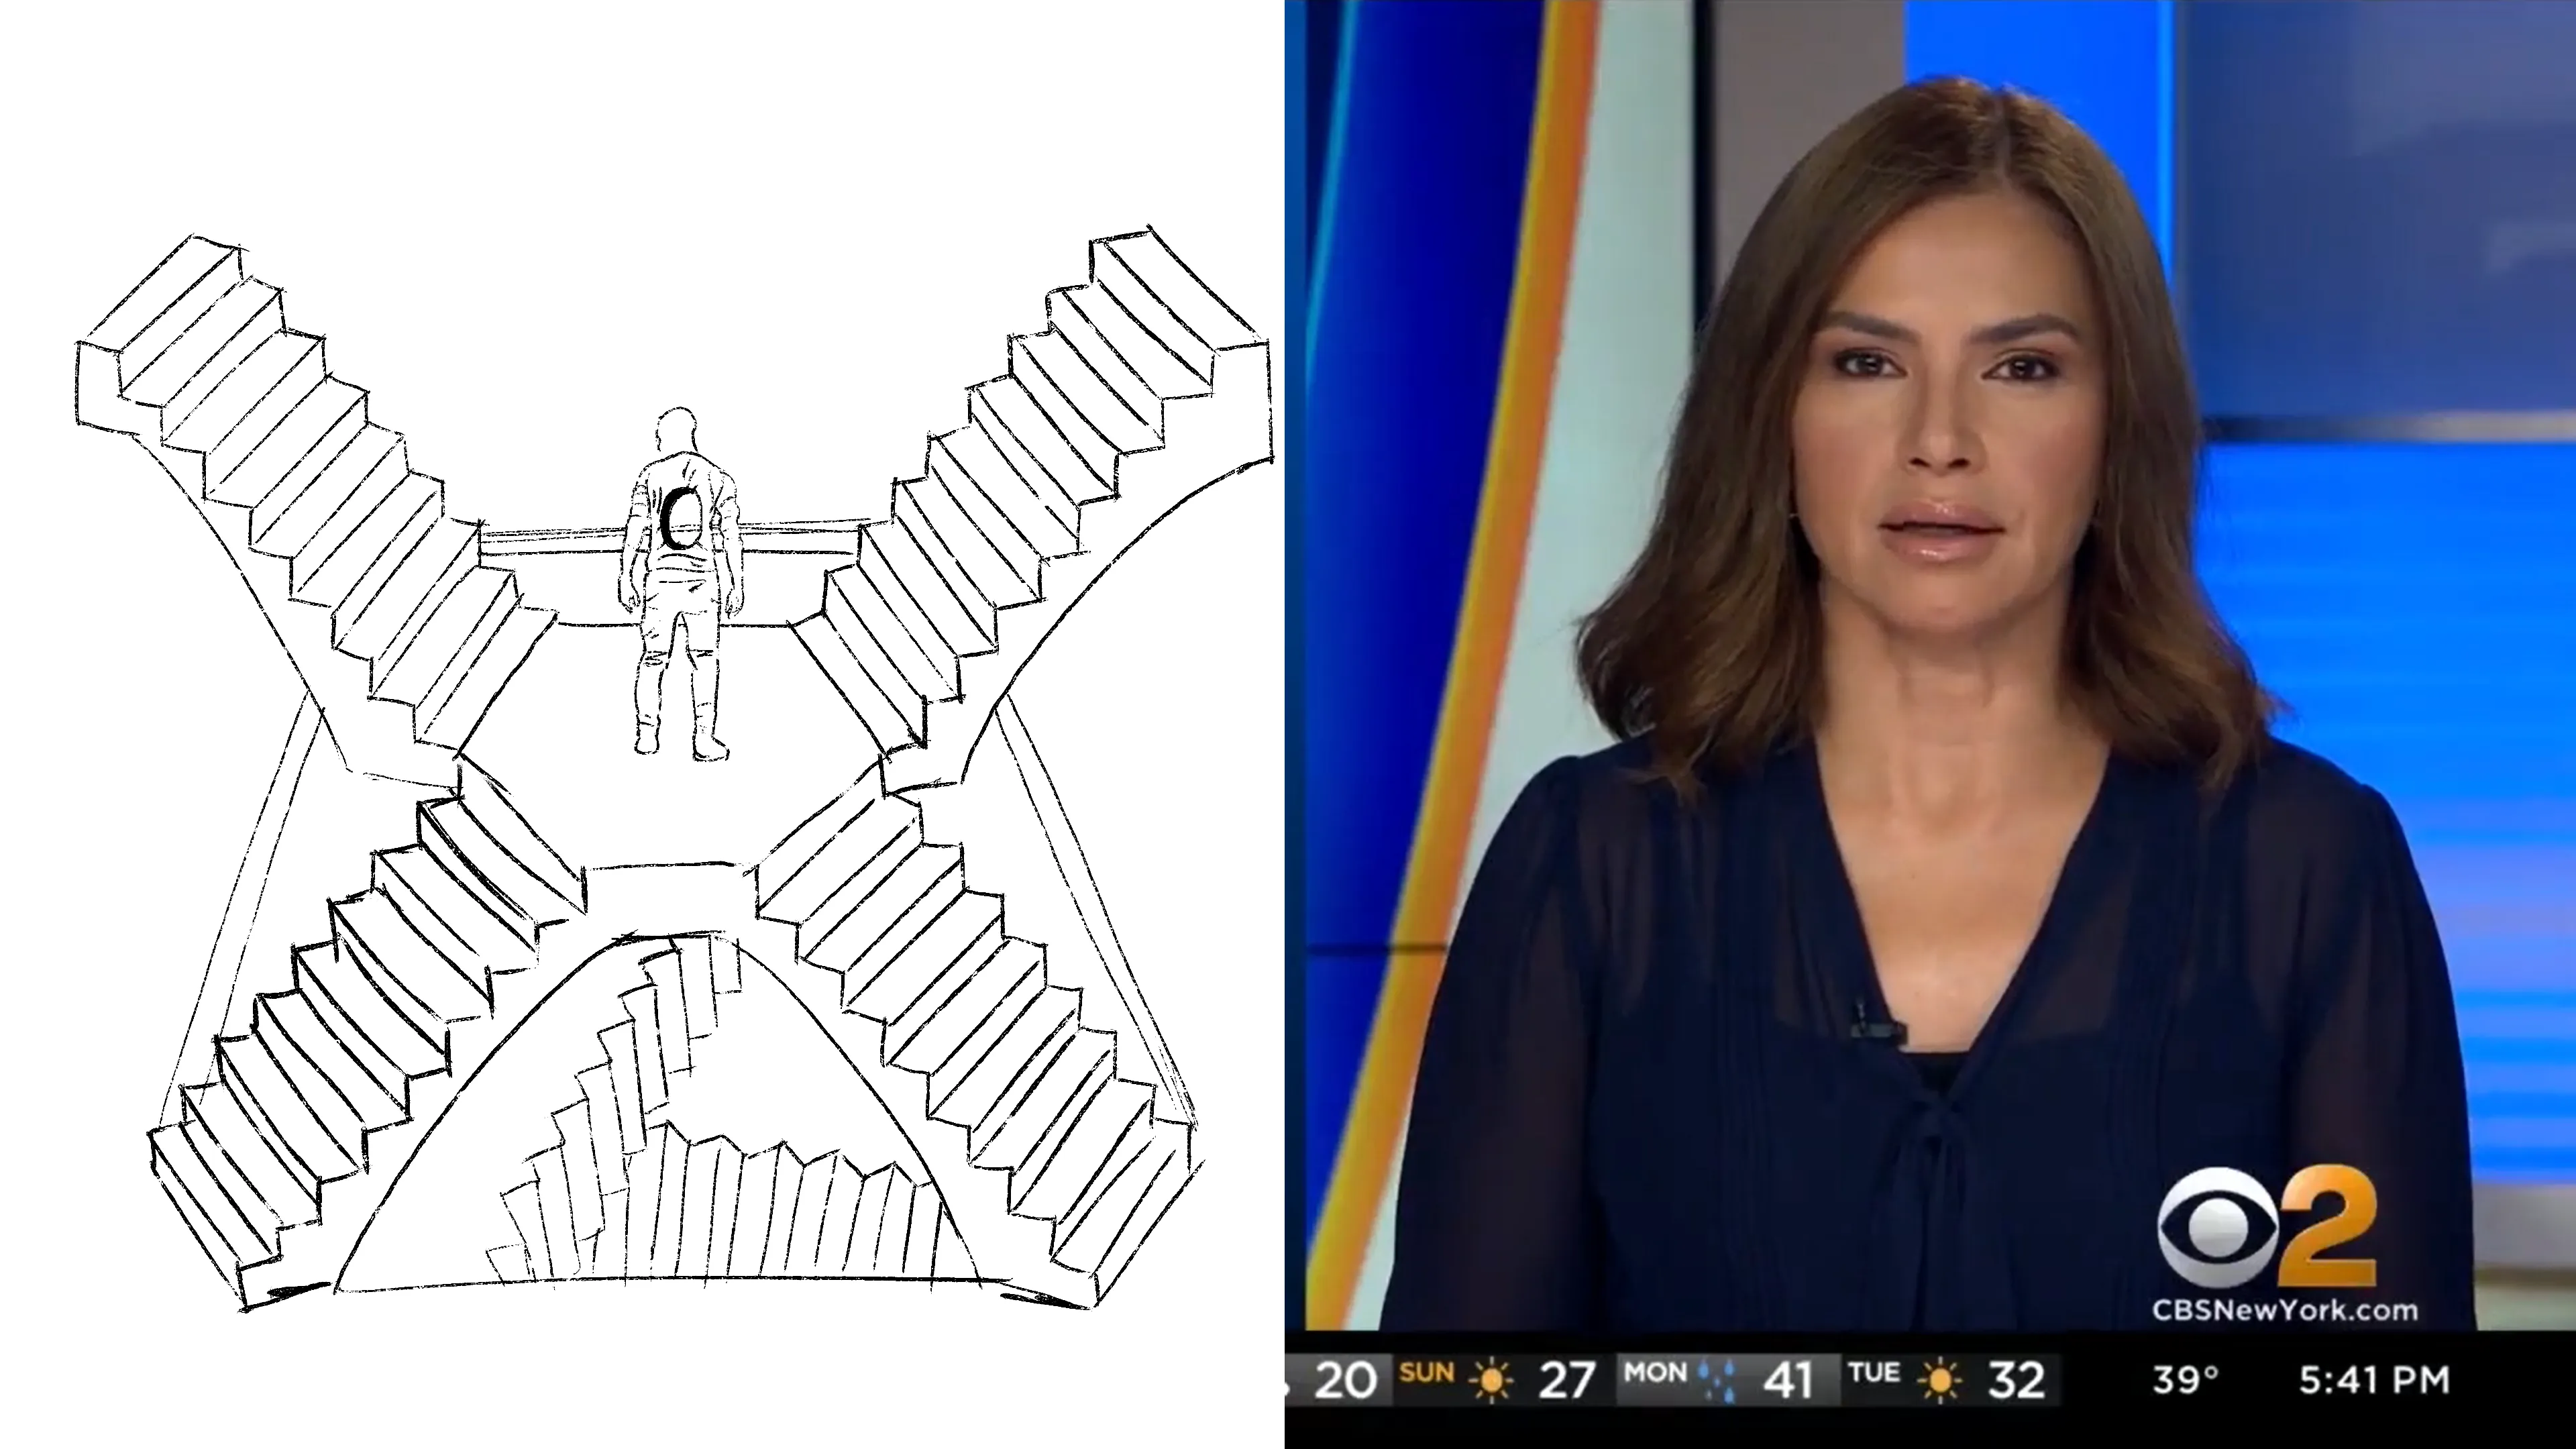 Sketch of multiple staircases with man standing in the middle next to still from a female newsreader wearing black in front of blue background